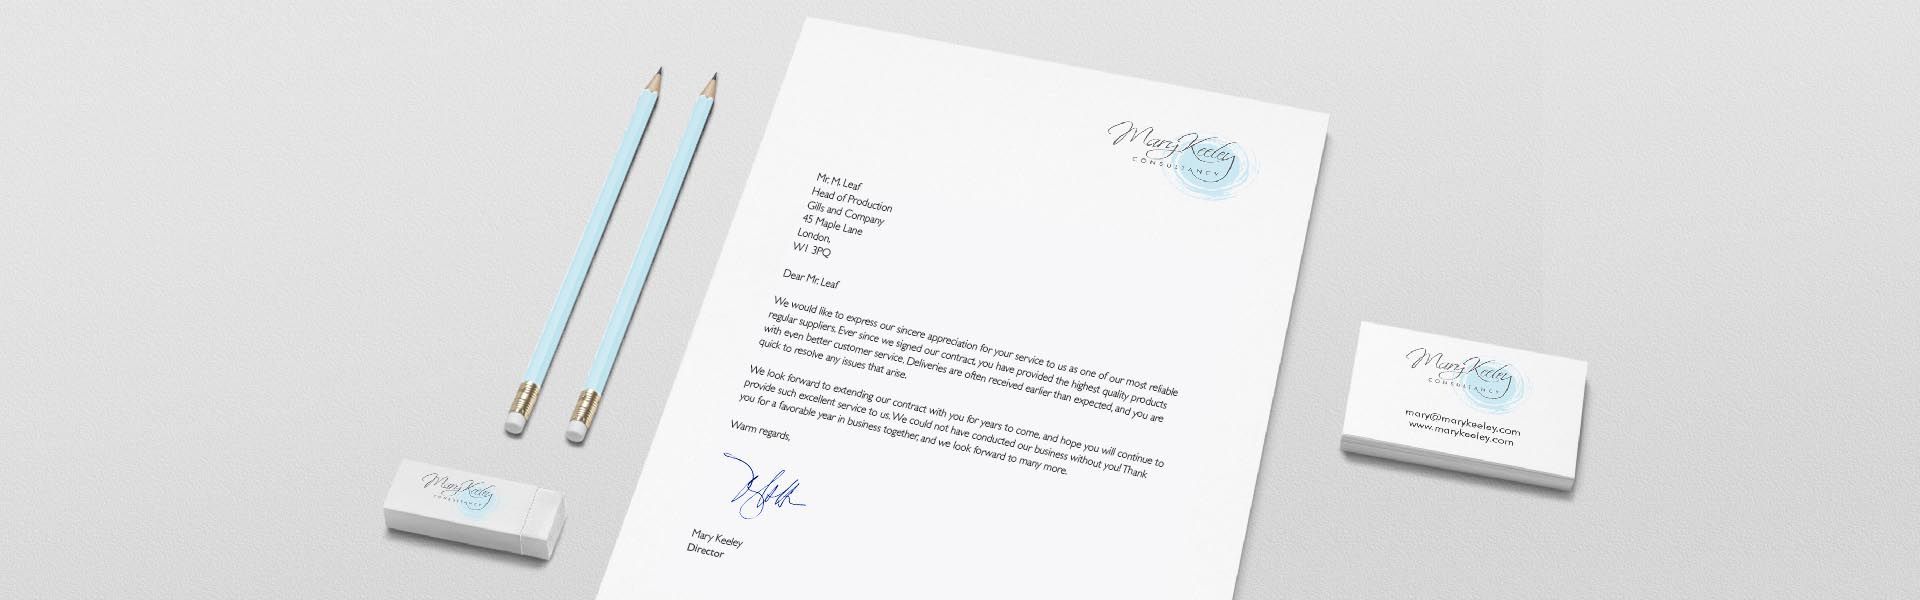 a letter from mary keeley sits next to a pencil and a business card